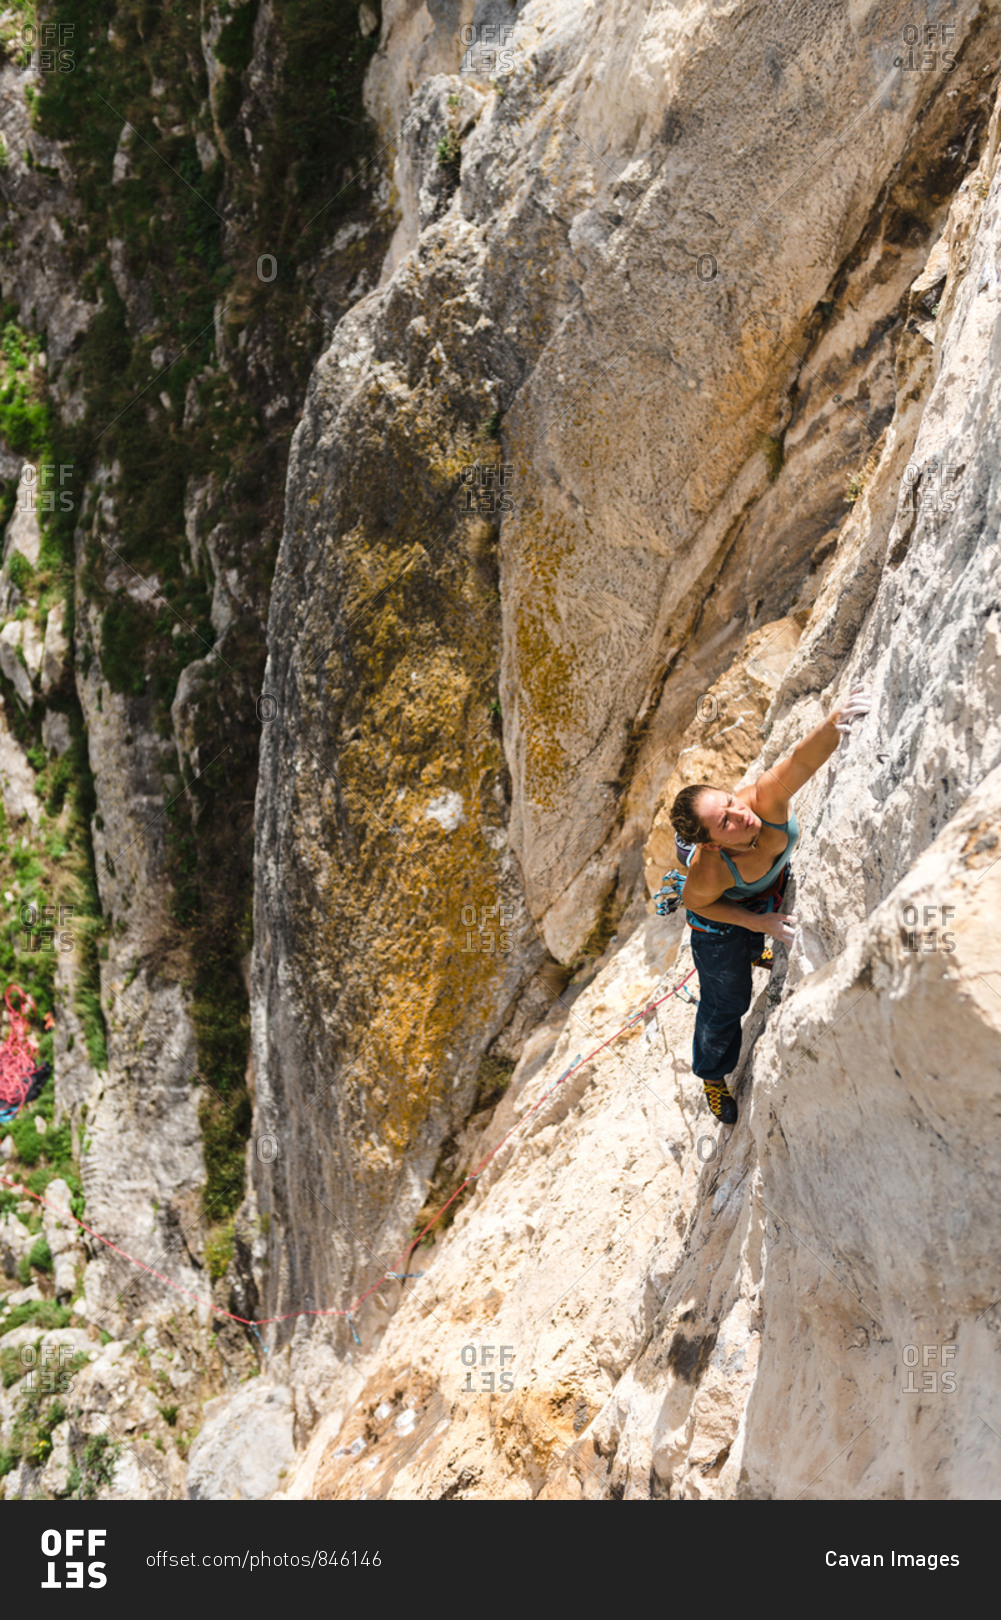 Strong woman rock climber grabbing a ledge in overhanging wall